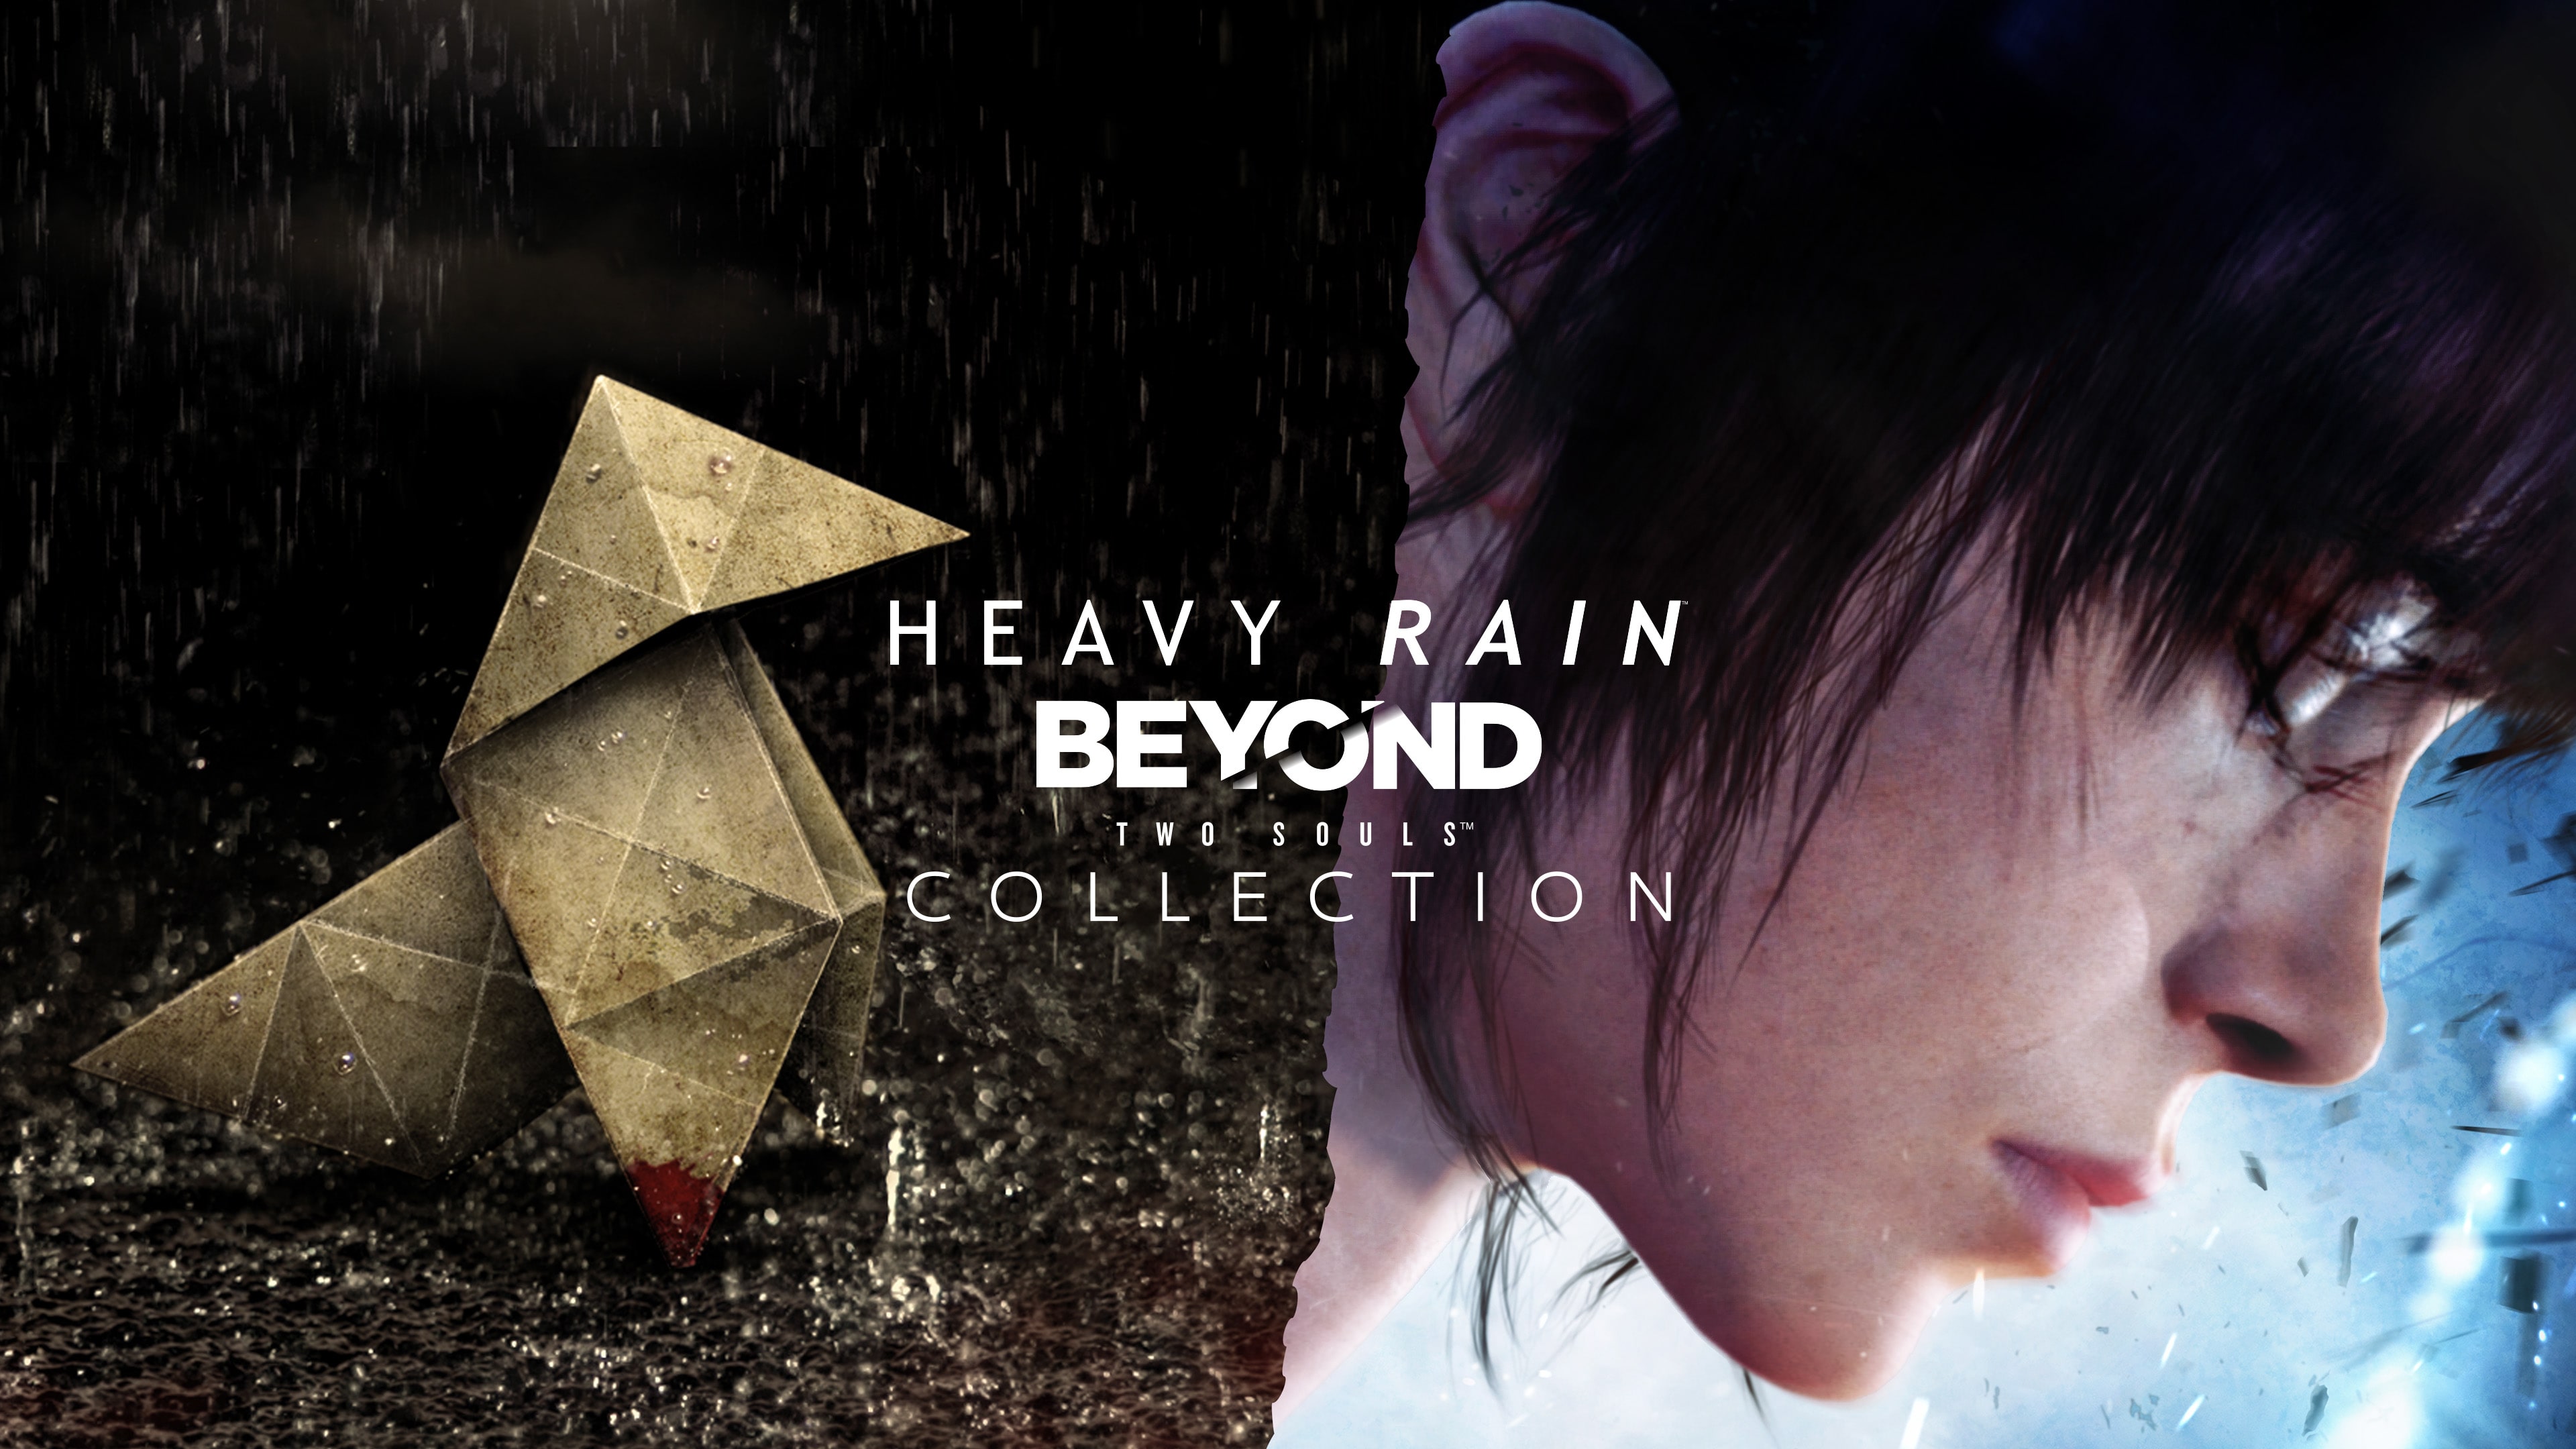 The Heavy Rain™ ＆ BEYOND: Two Souls™ Collection (English/Chinese/Korean Ver.)